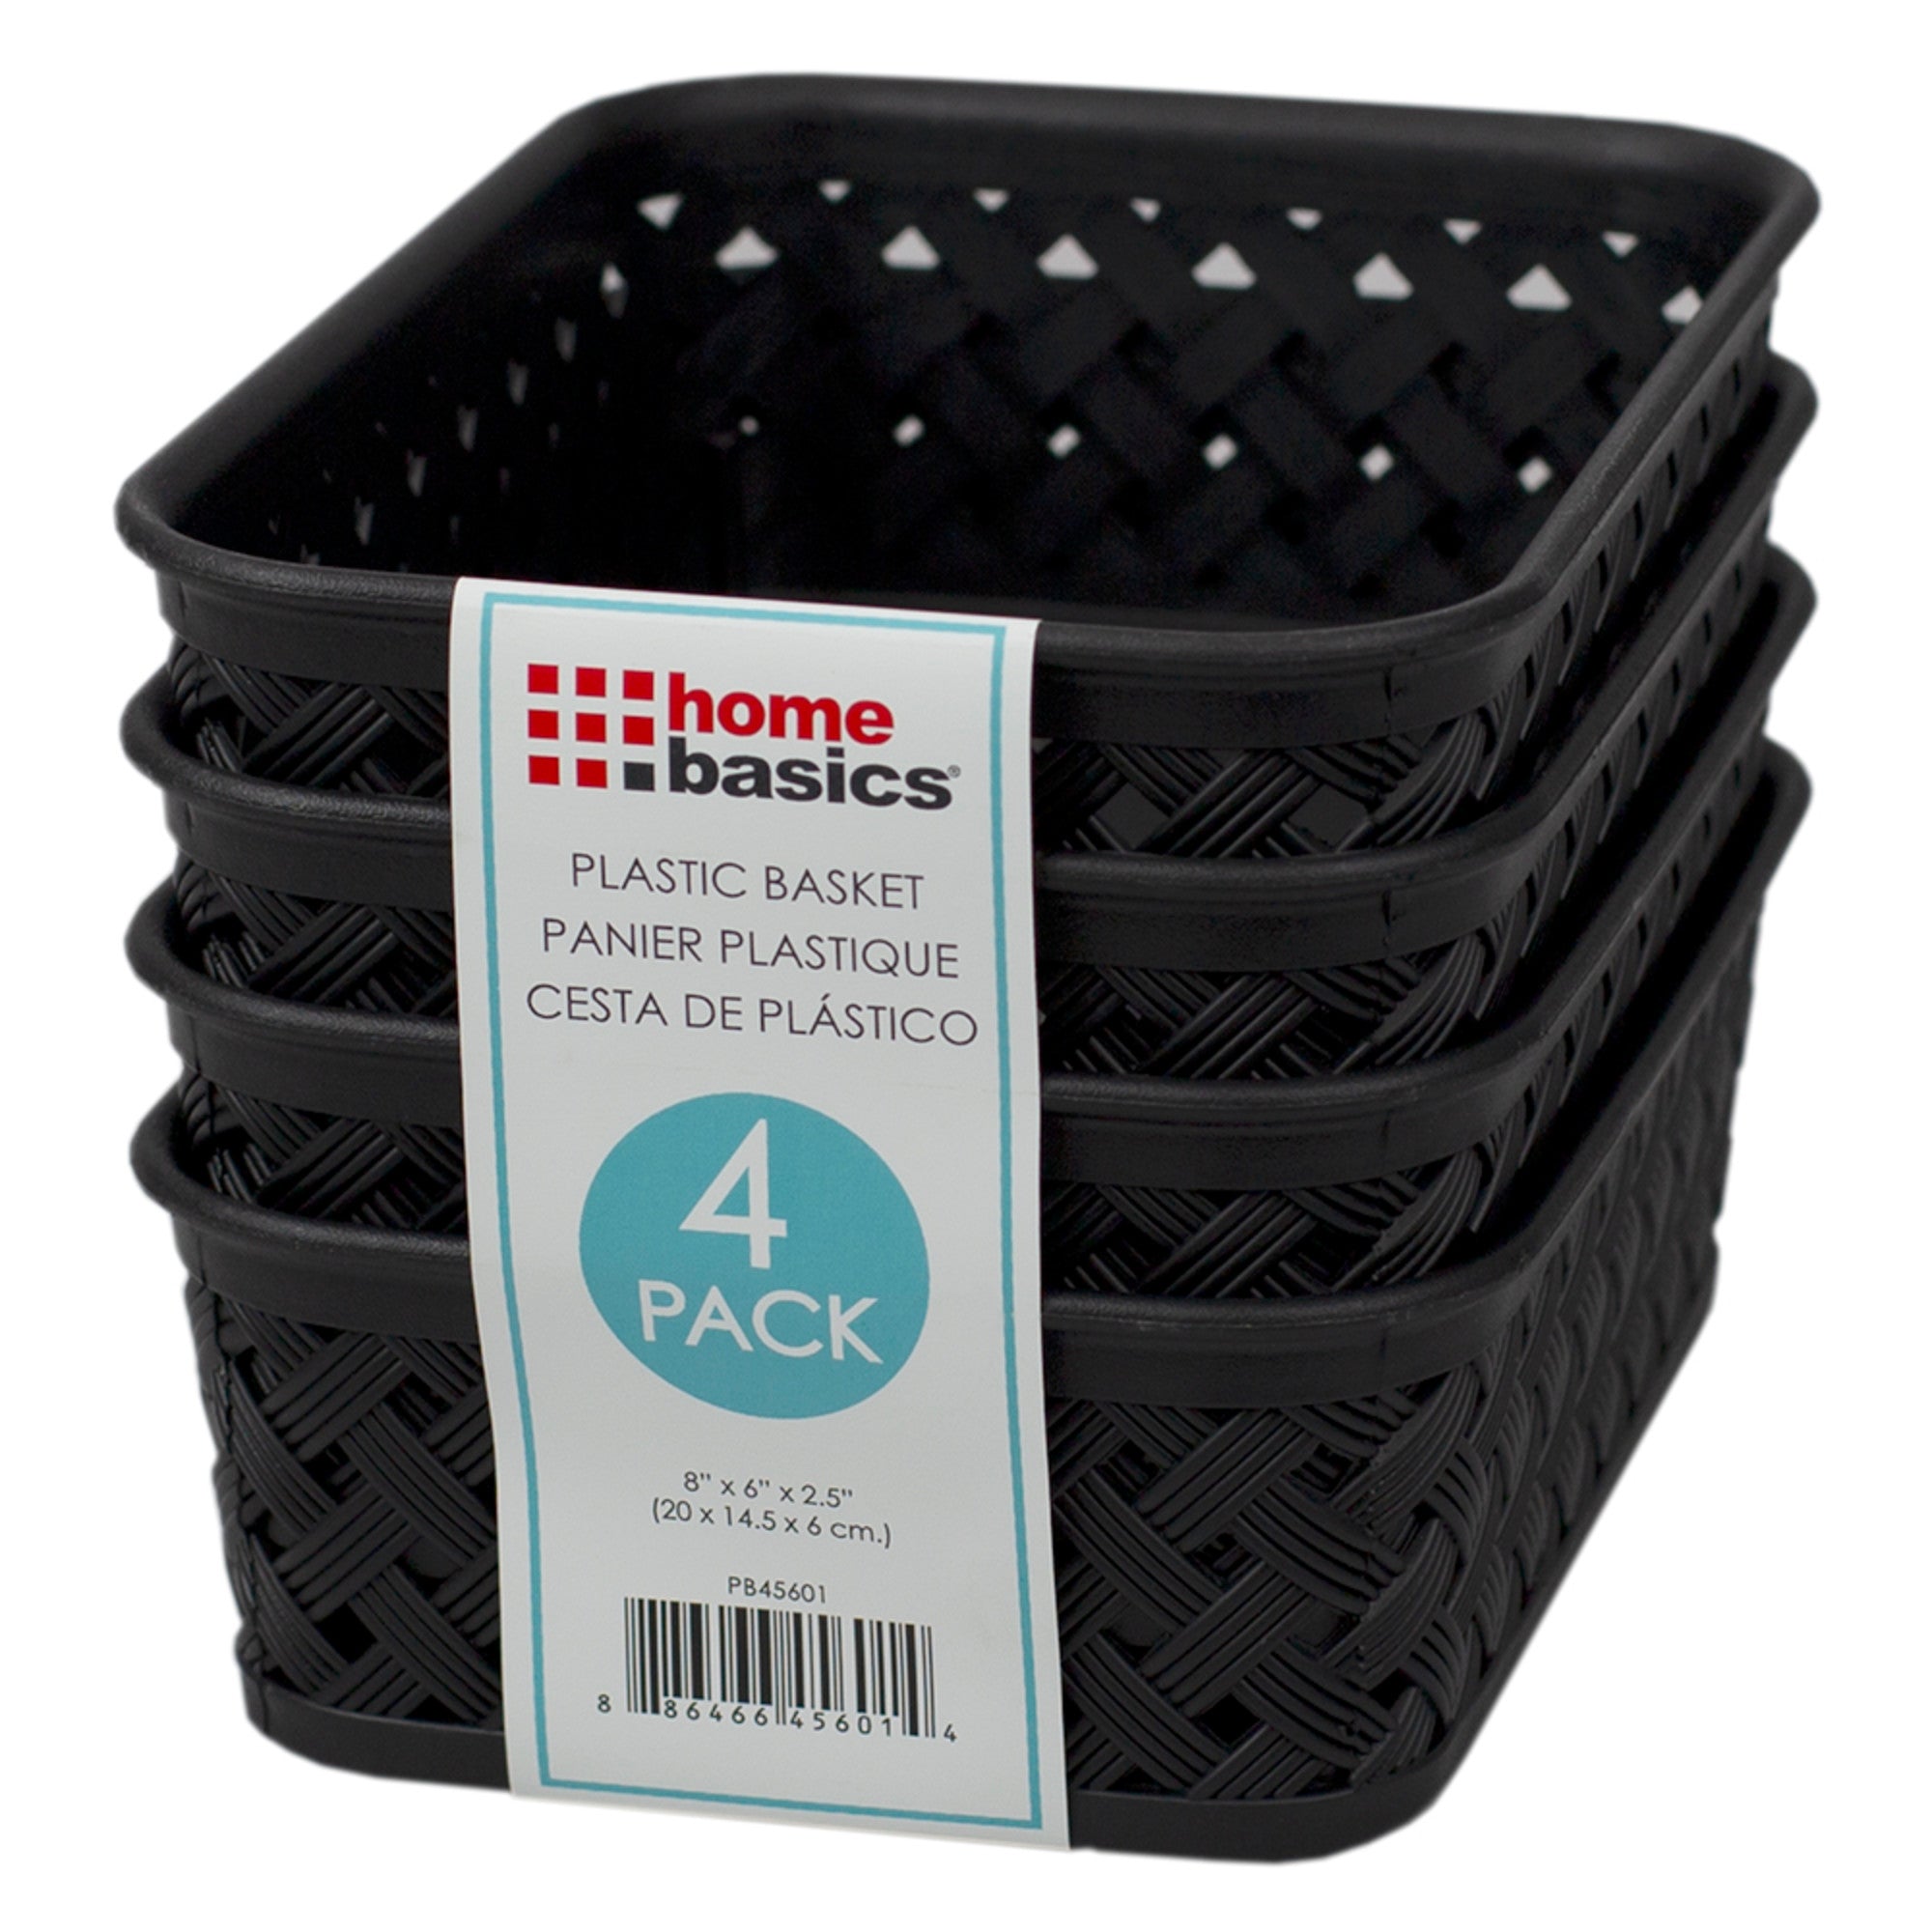 Home Basics Triple Woven 7.75" x 5.25" x 2.5" Multi-Purpose Stackable Plastic Storage Basket, (Pack of 4) - Assorted Colors